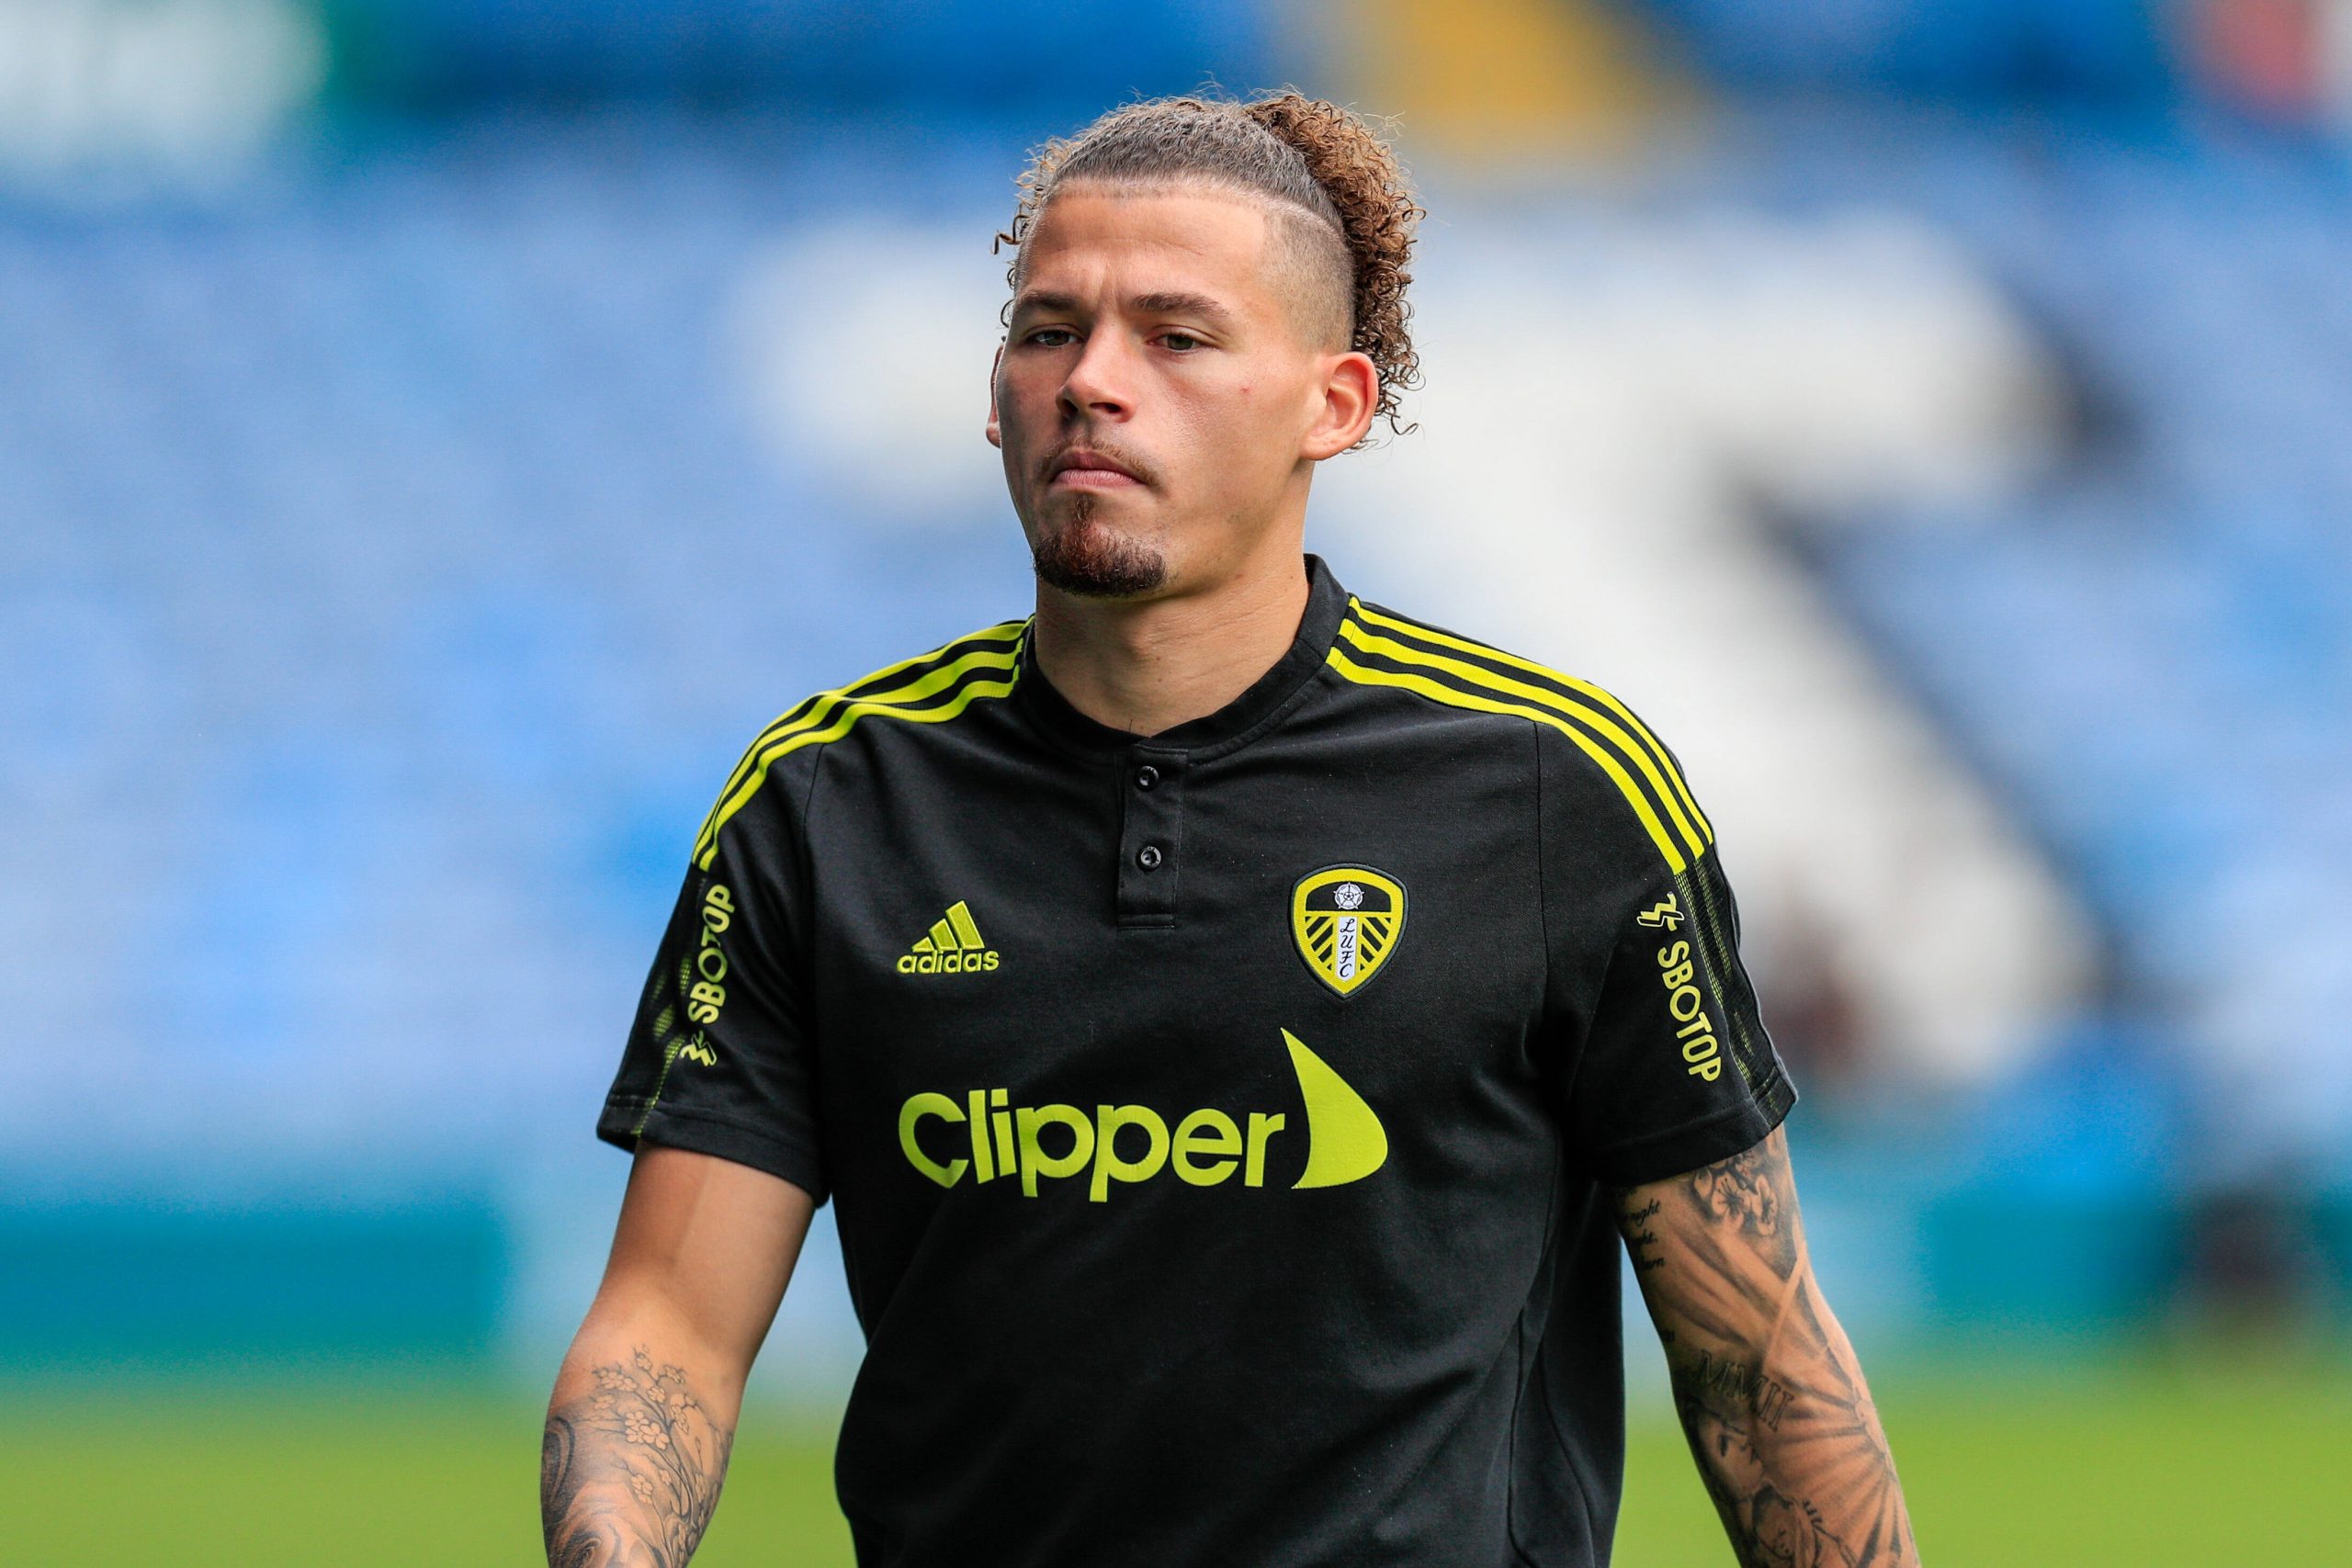 Tottenham Hotspur manager Antonio Conte wants to sign Manchester United target Kalvin Phillips in the summer.